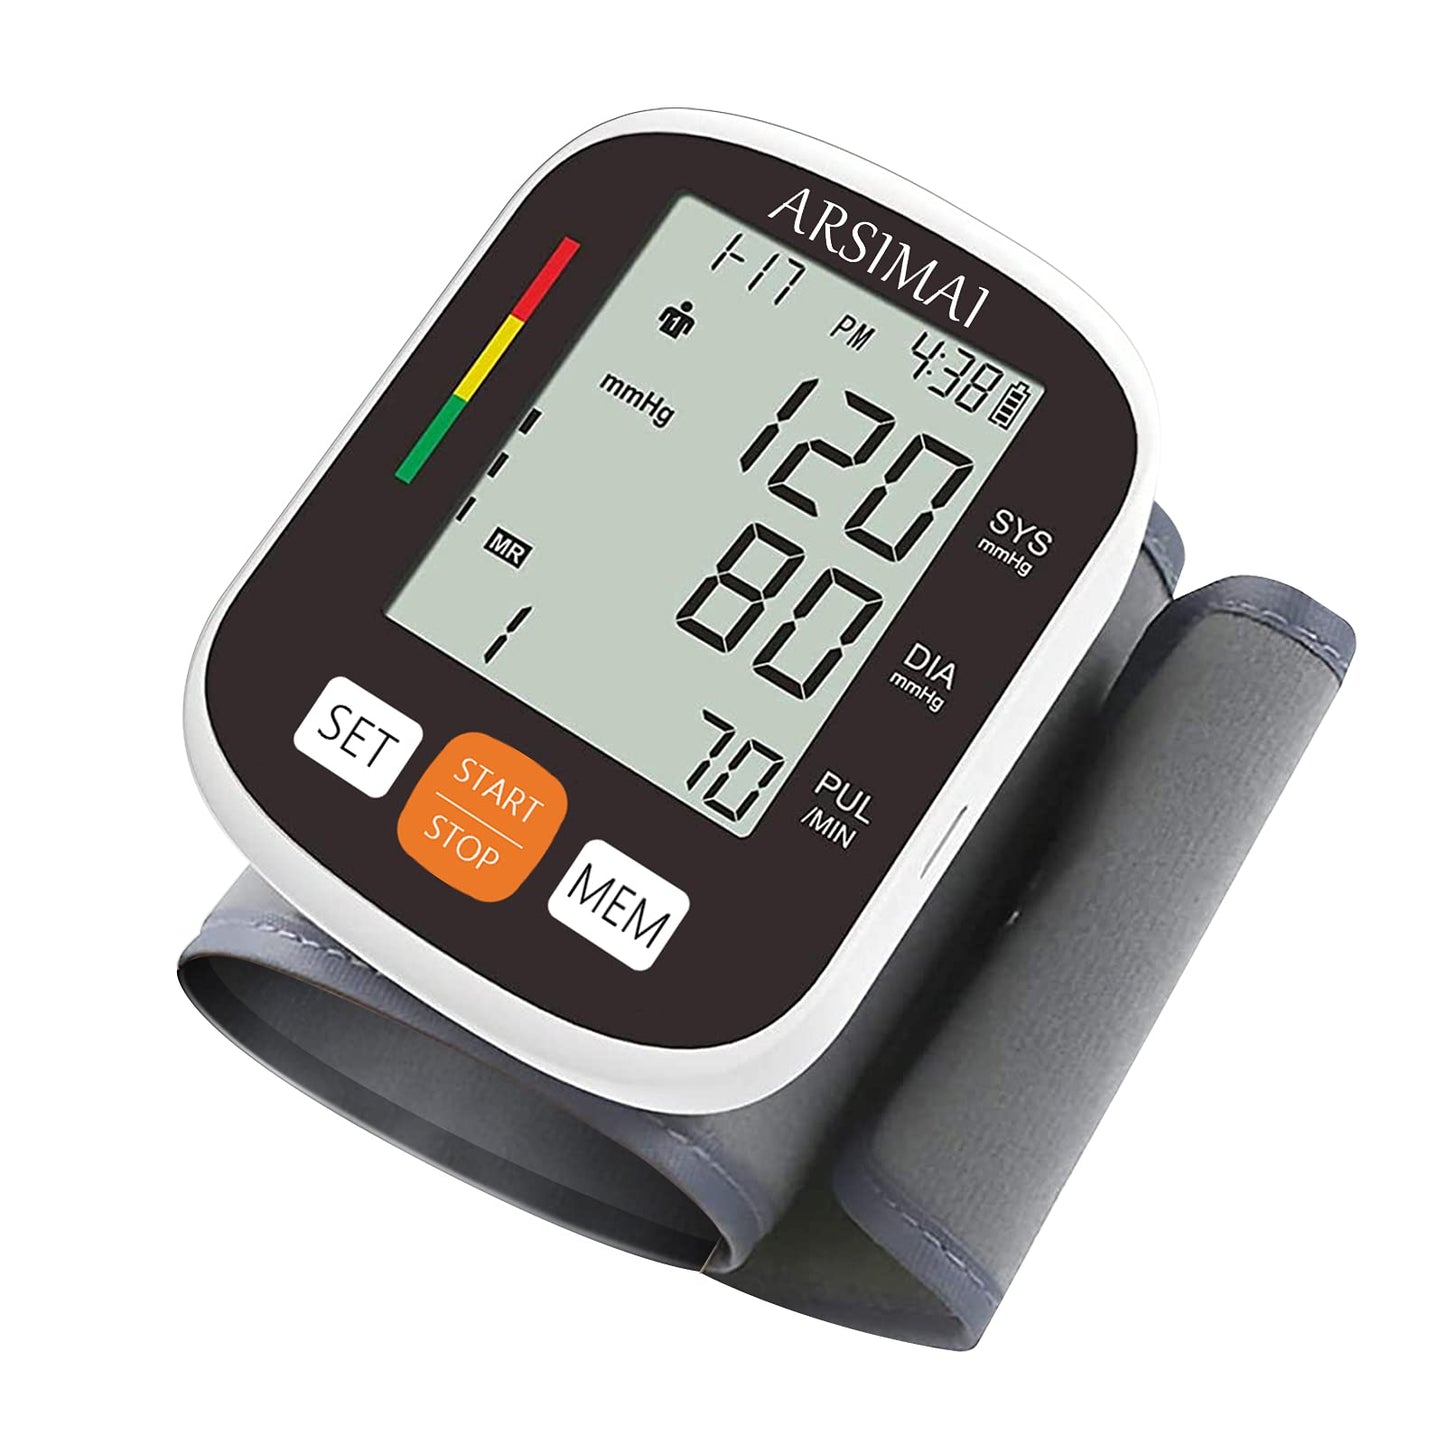 Blood Pressure Monitor - Wrist Accurate Automatic High Blood Pressure Monitors Portable LCD Screen with Storage Case and Adjustable Cuff Powered by Battery - Black